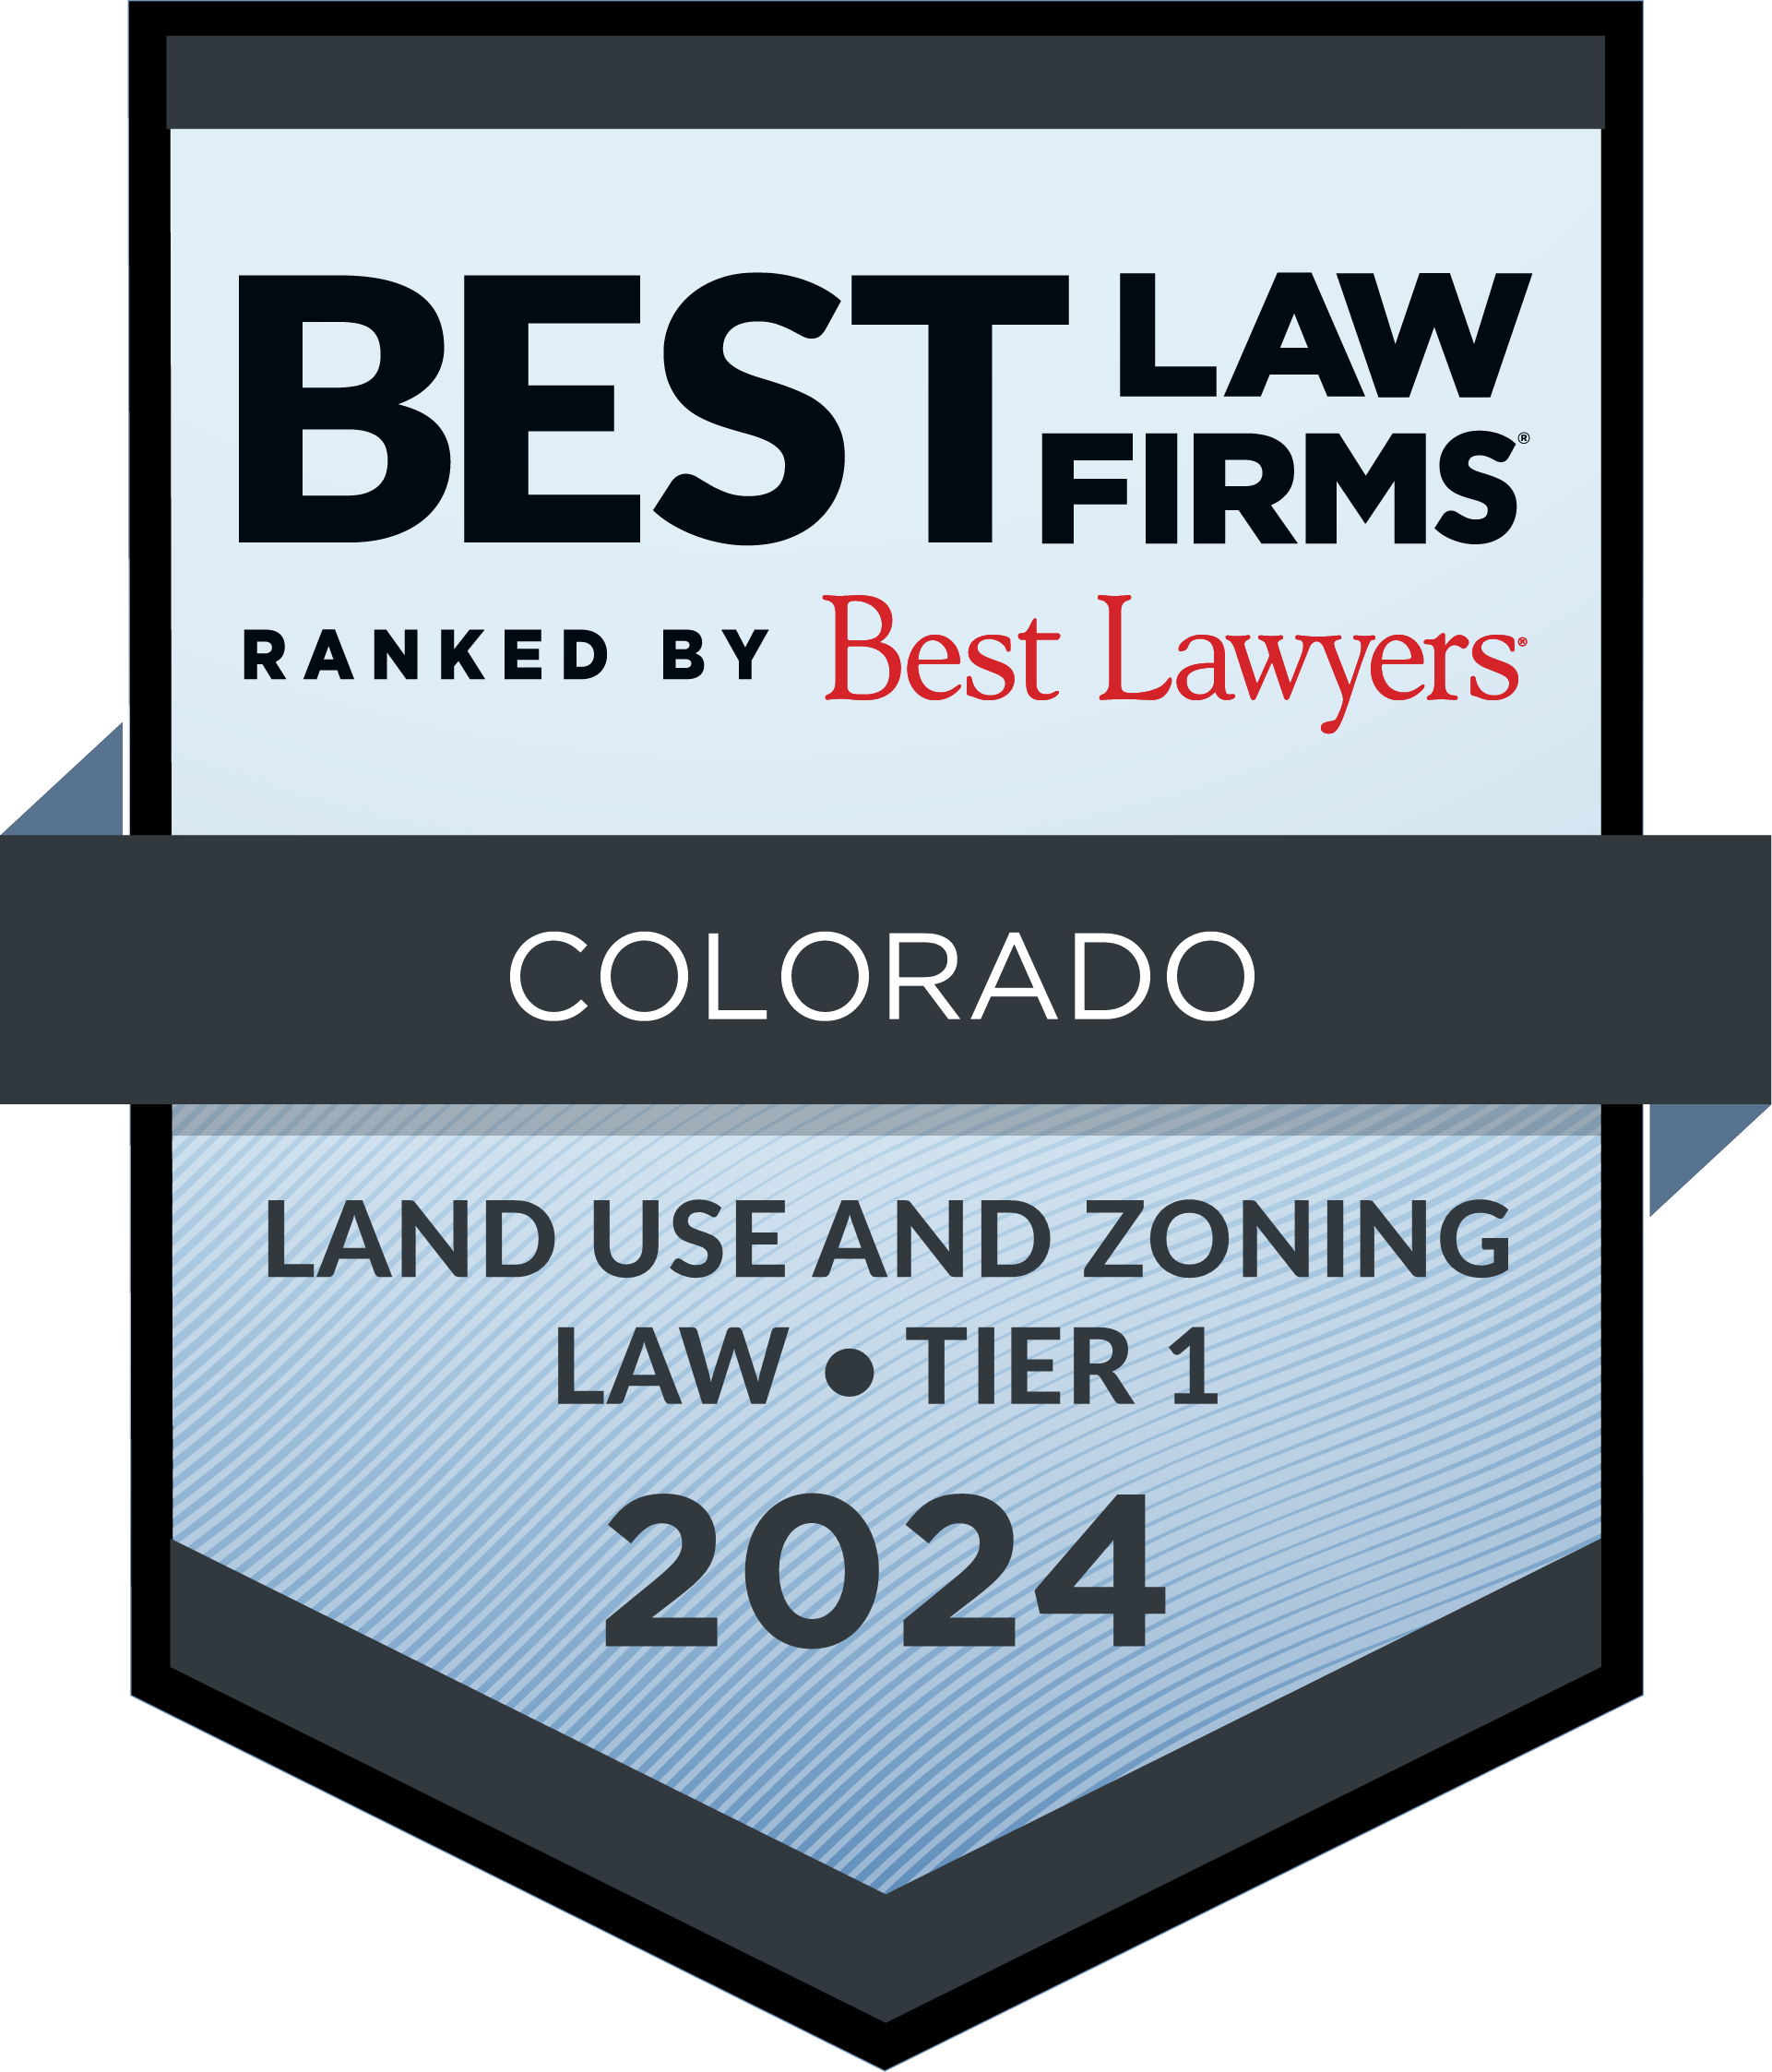 Best Lawyers | Best Law Firms | Rankend By Best Lawyers Colorado Land Use And Zoning Law Tirer 1 2024